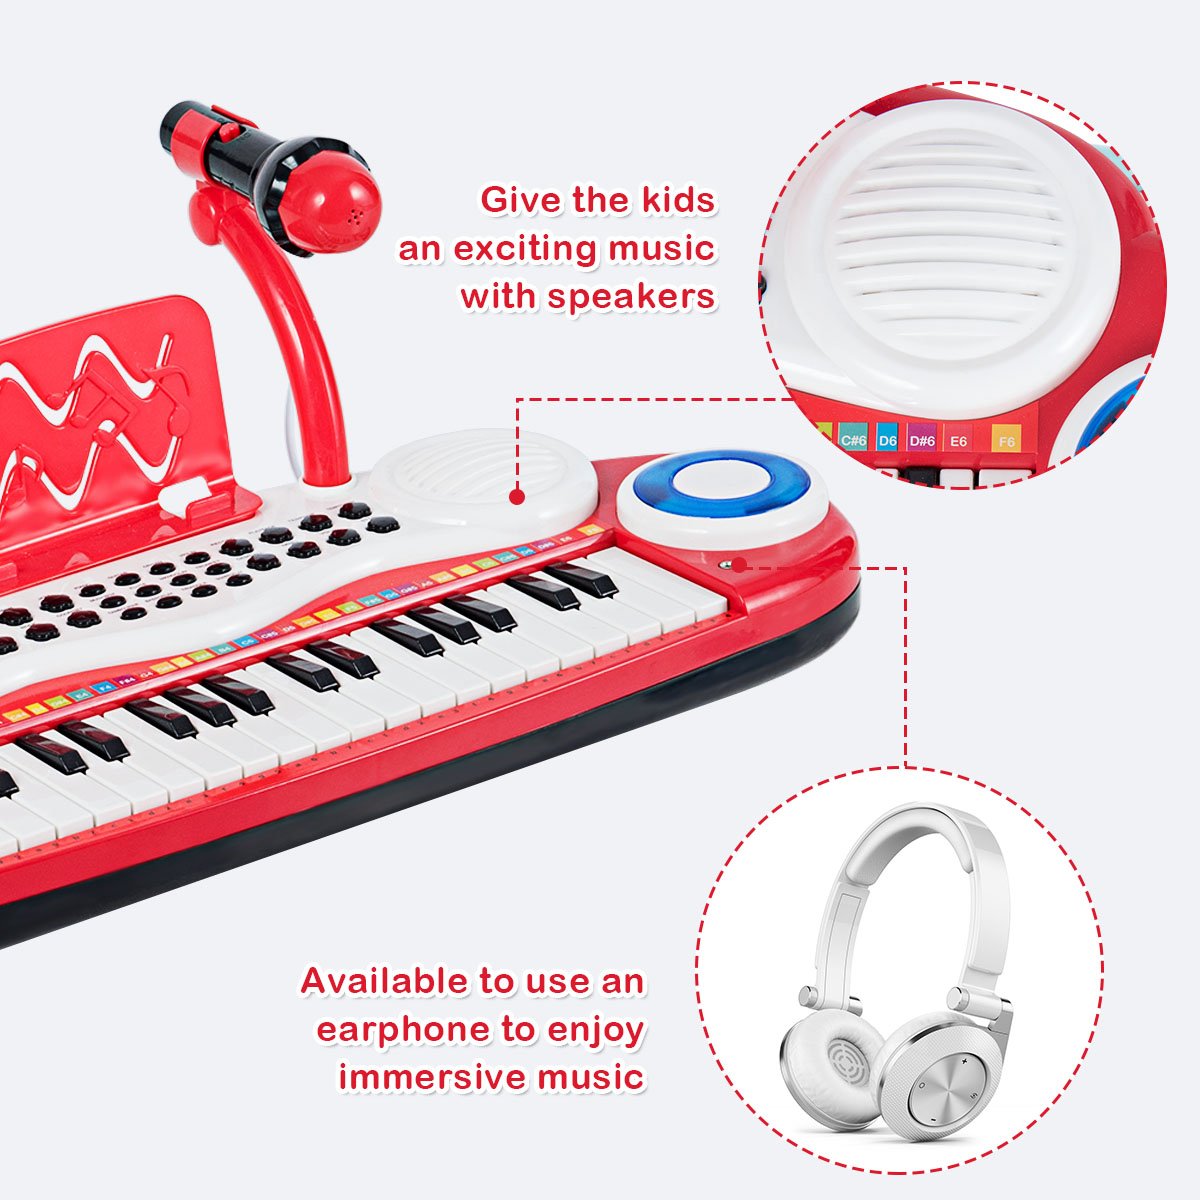 Explore Musical Talents with the Red Keyboard Piano for Kids